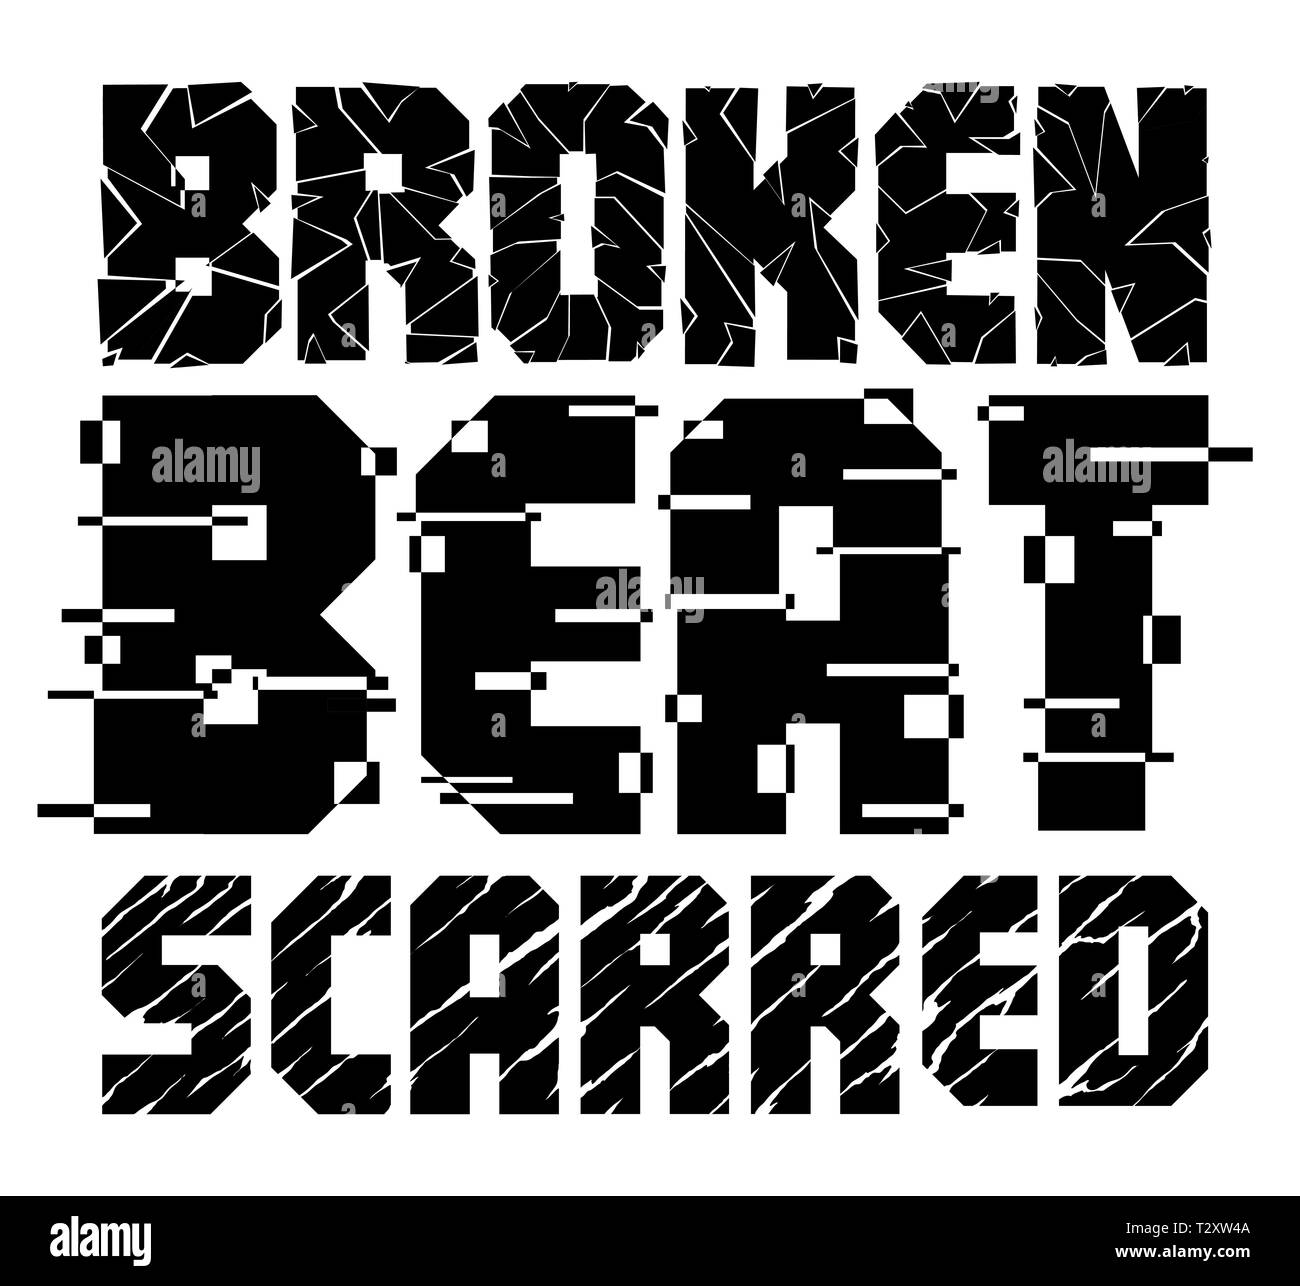 Beat Scarred lettering design. Grunge, distressed and cut out design illustration for web, t-shirt design, other graphic design use Stock Vector Art - Alamy